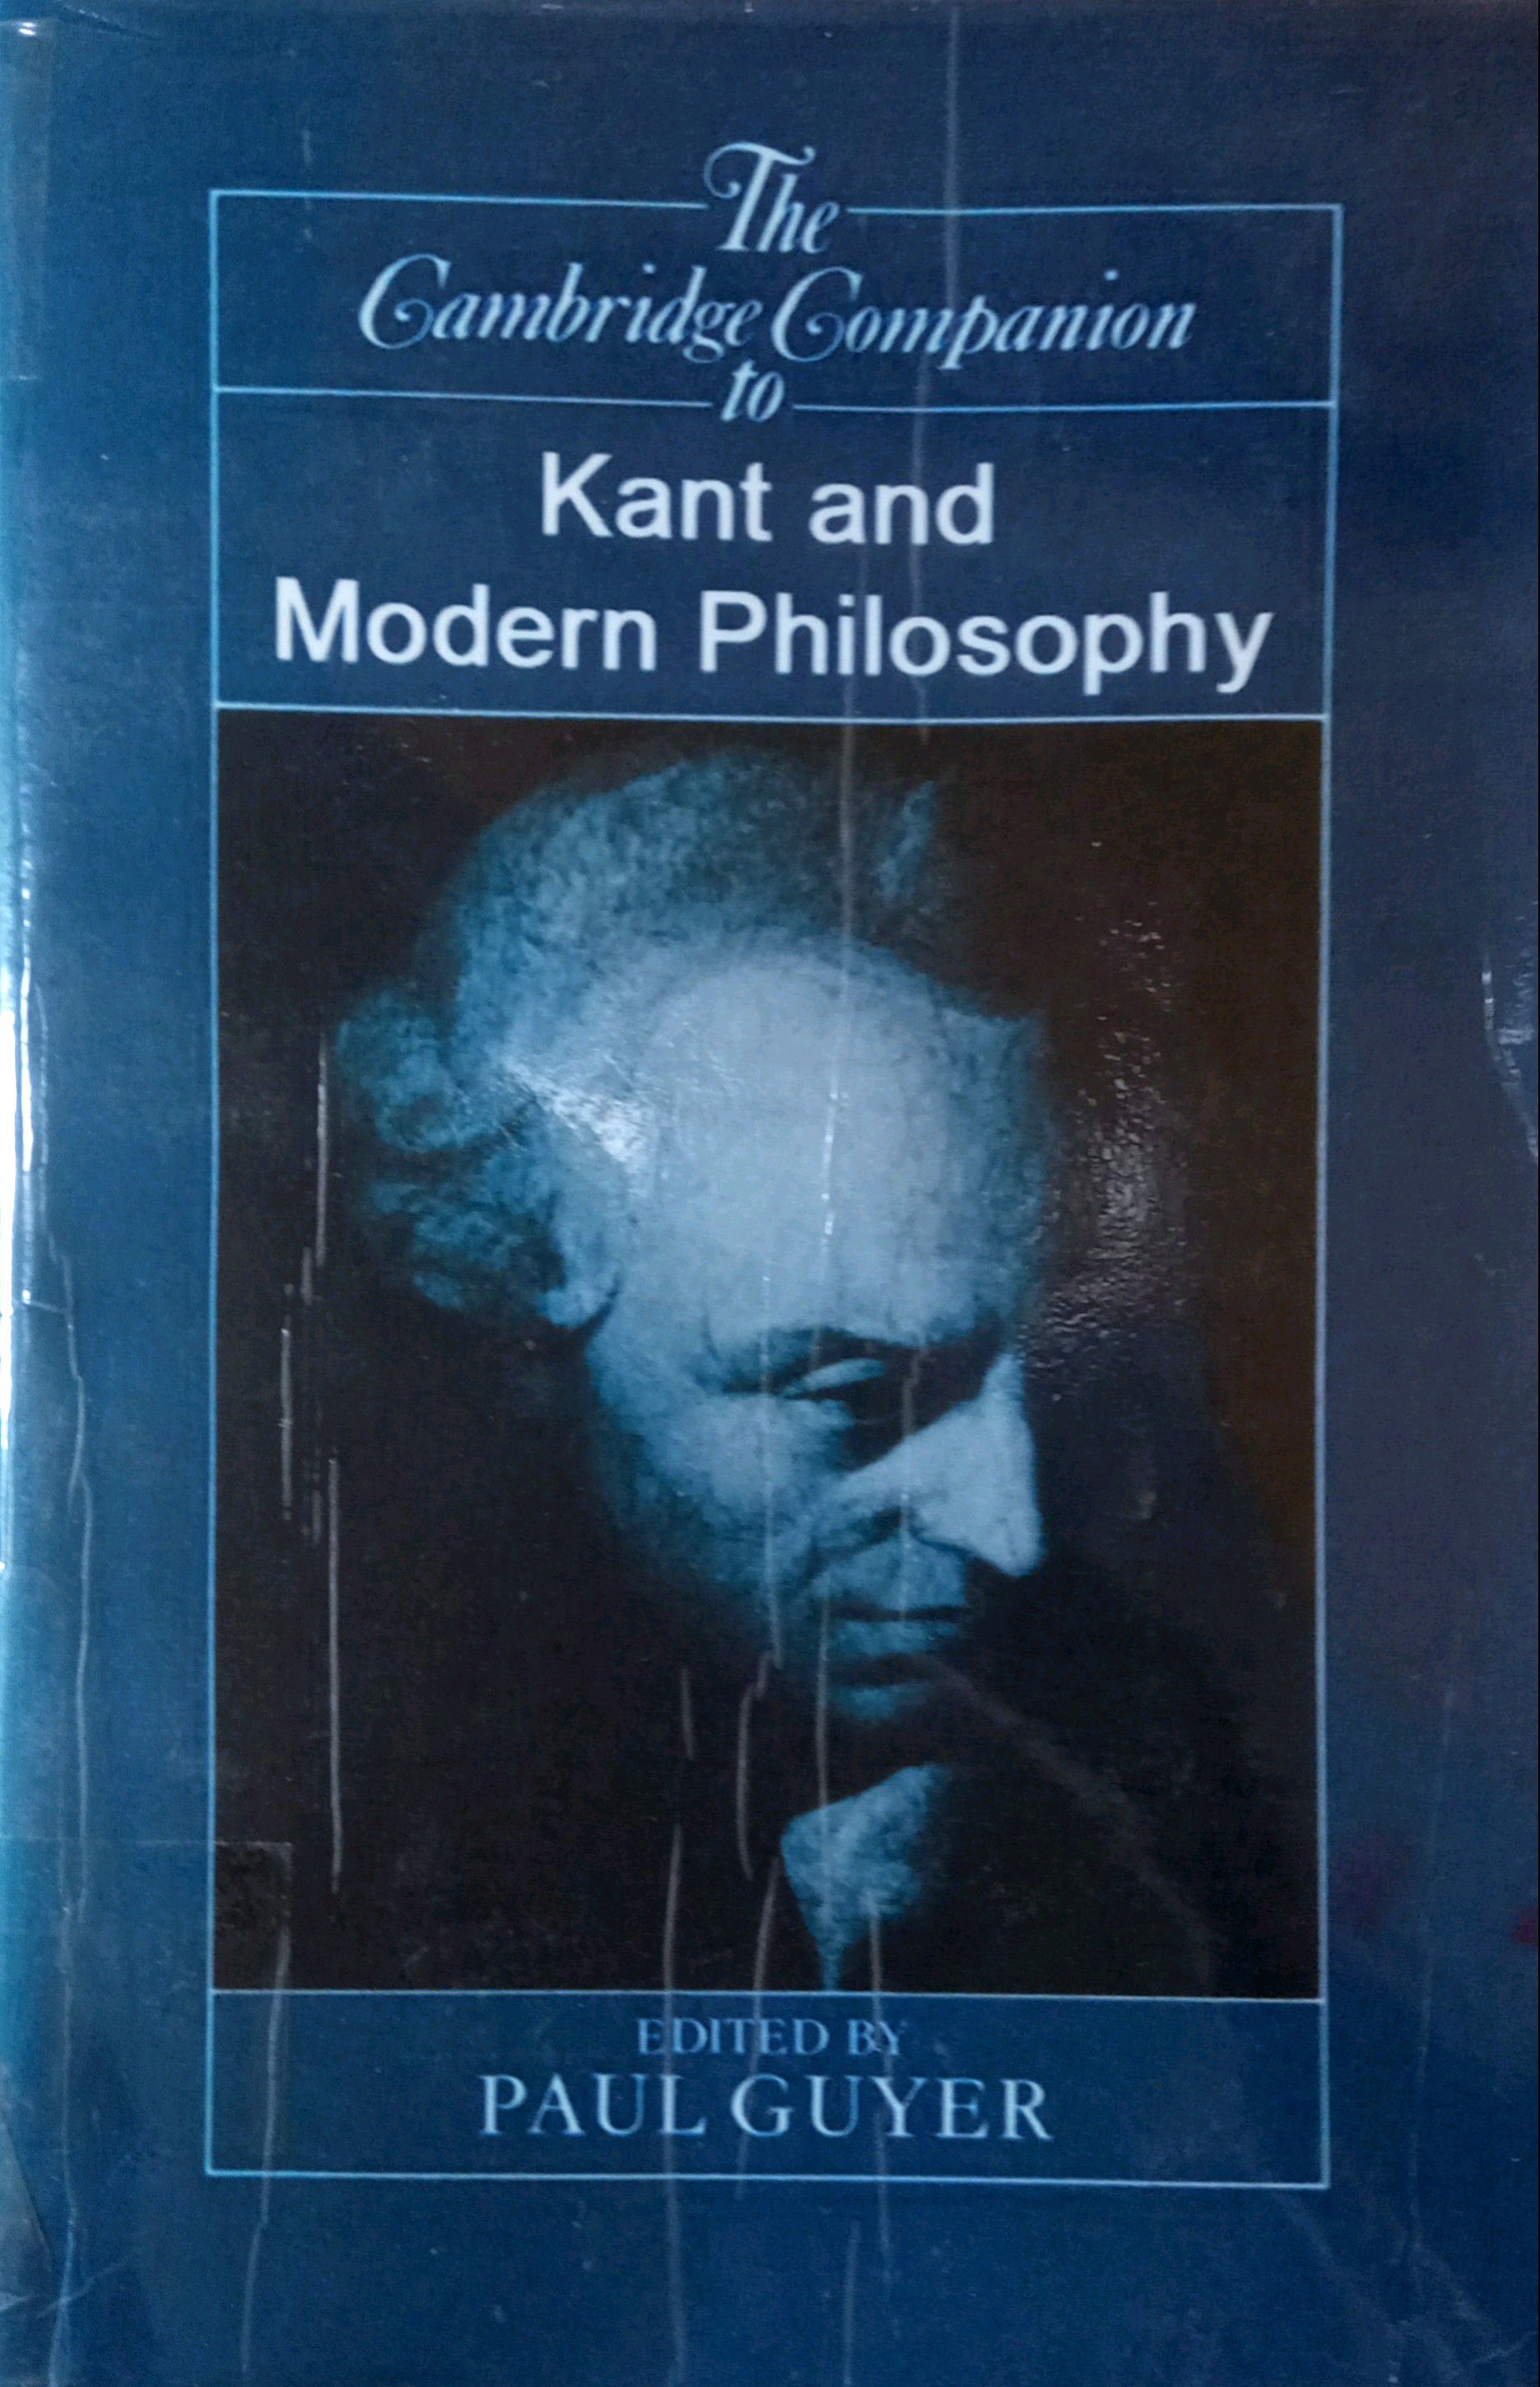 THE CAMBRIDGE COMPANION TO KANT AND MODERN PHILOSOPHY